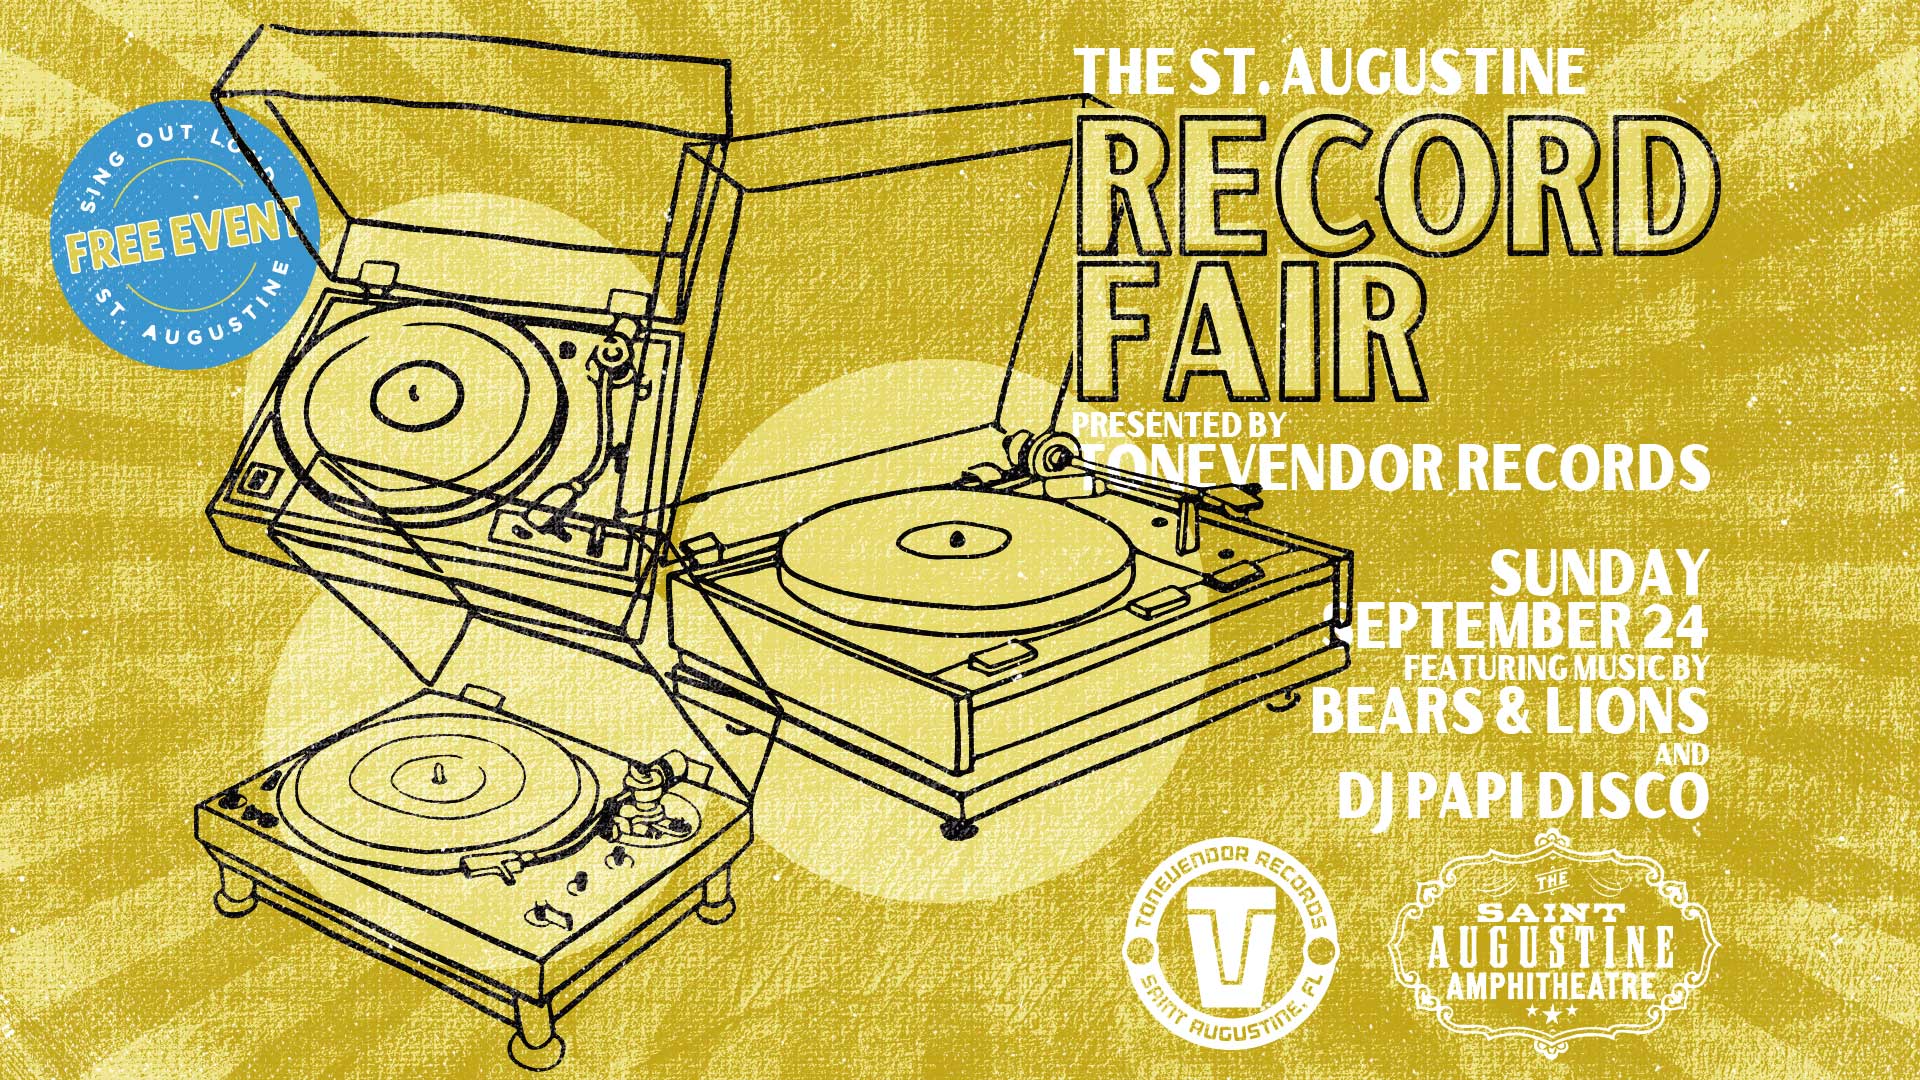 The St. Augustine Record Fair - Free Event!